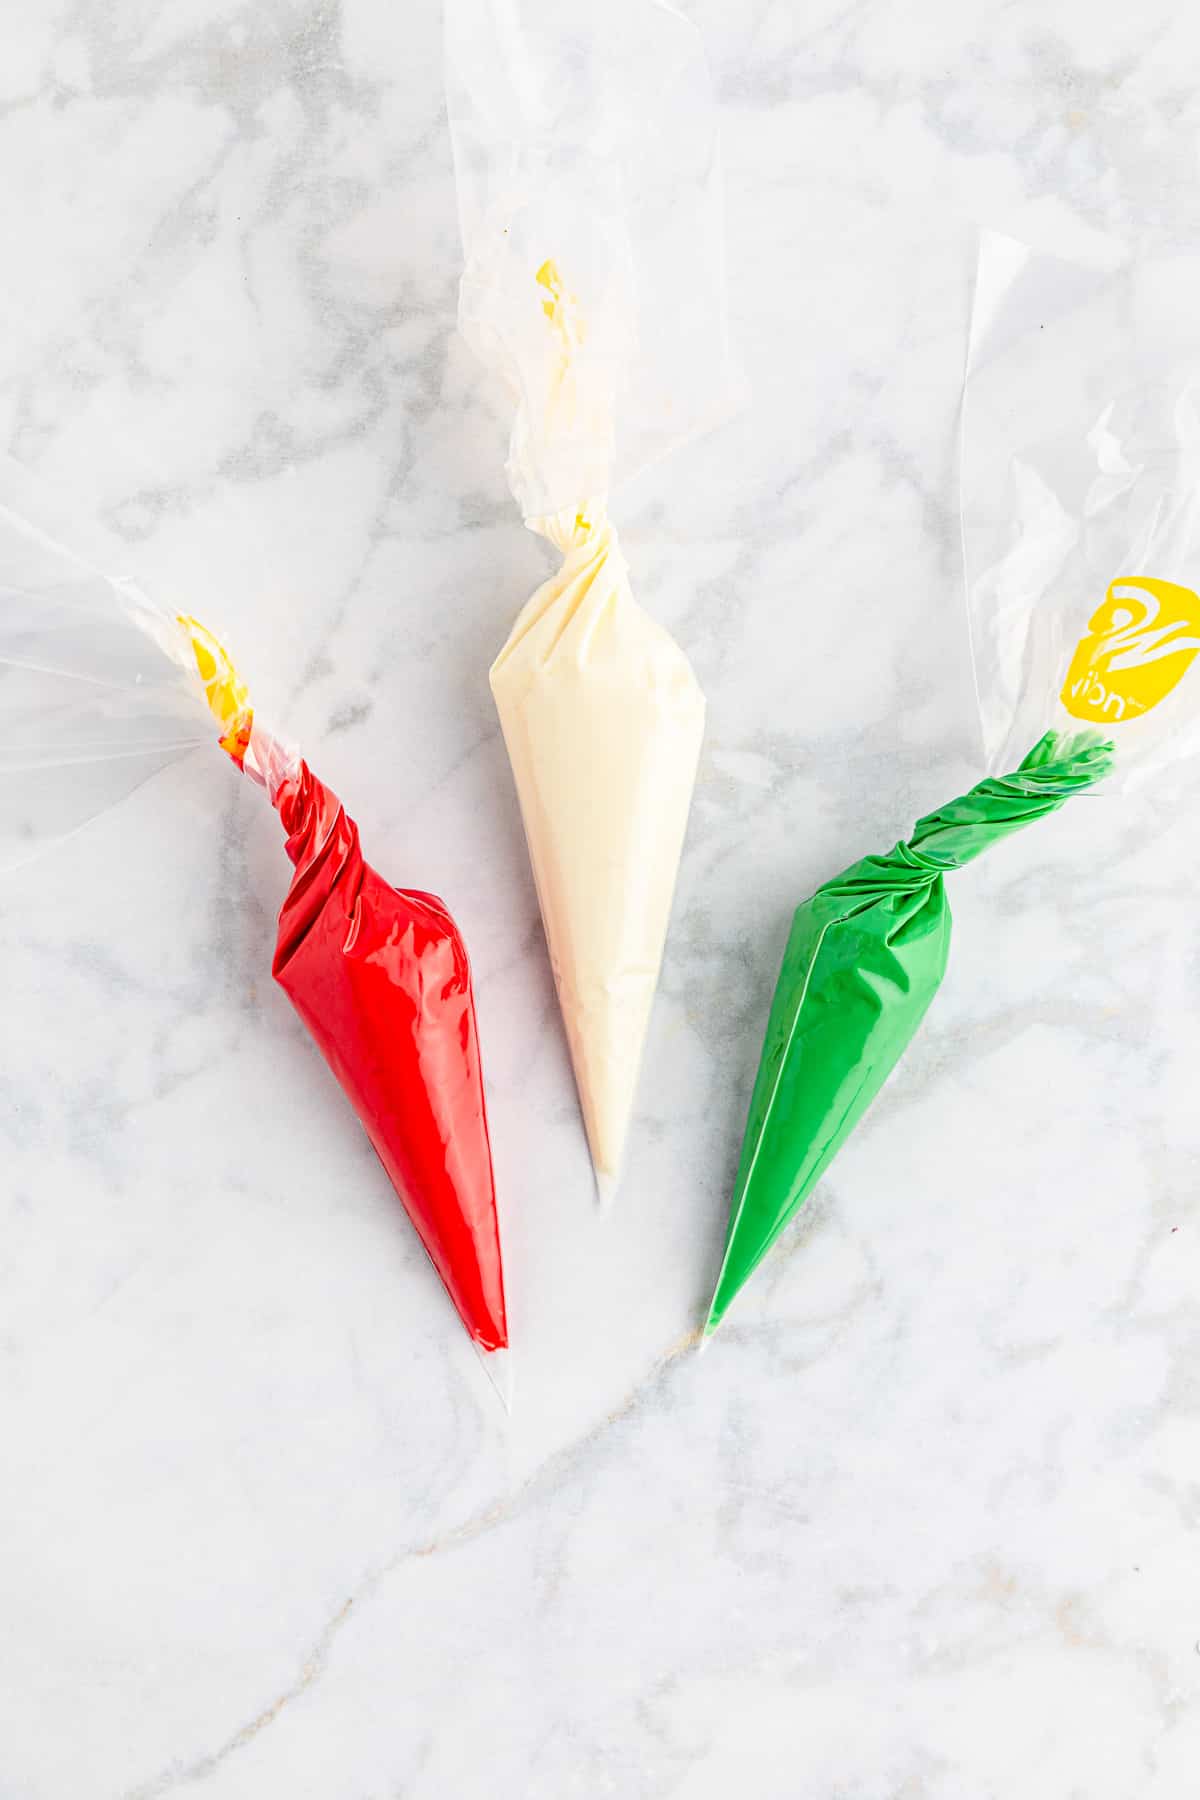 Three pastry bags full of melted red, green, and white candy melts on a marble counter from above.